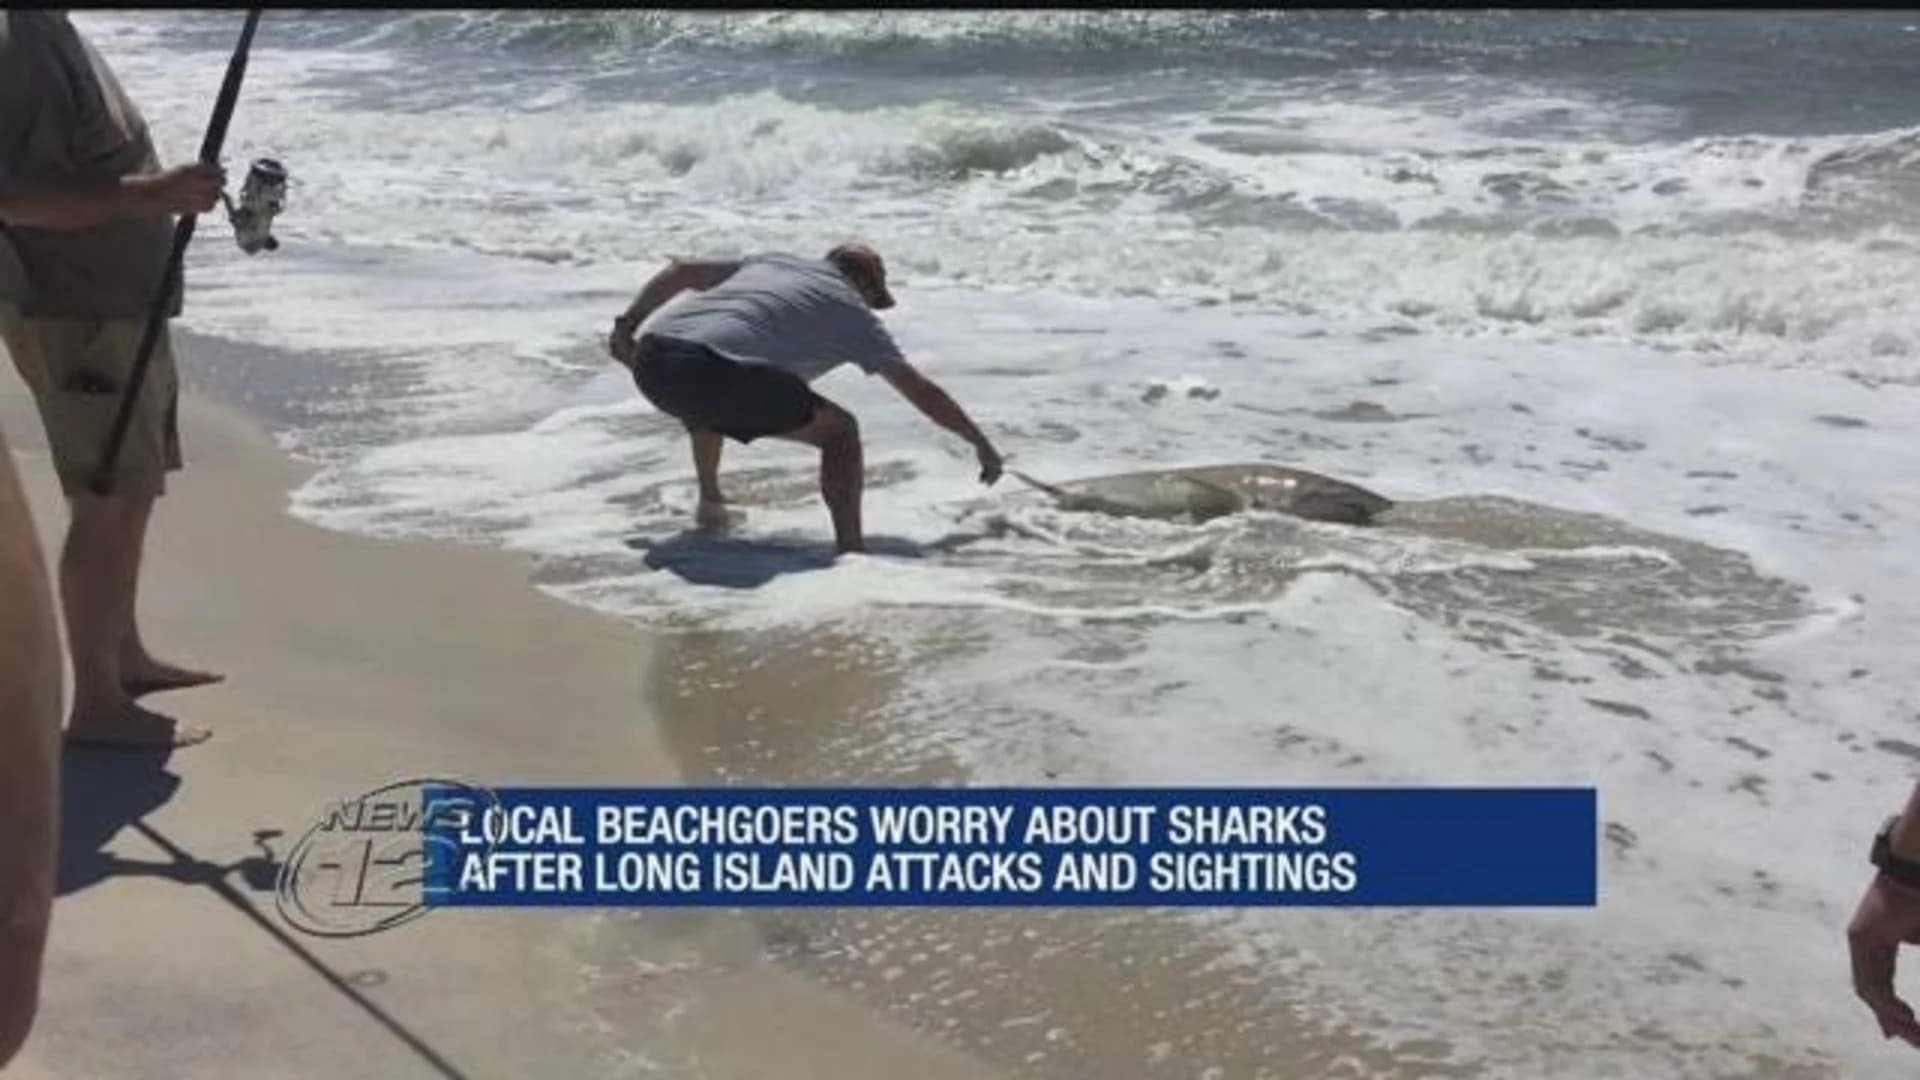 Experts: No reason to fear sharks despite recent encounters